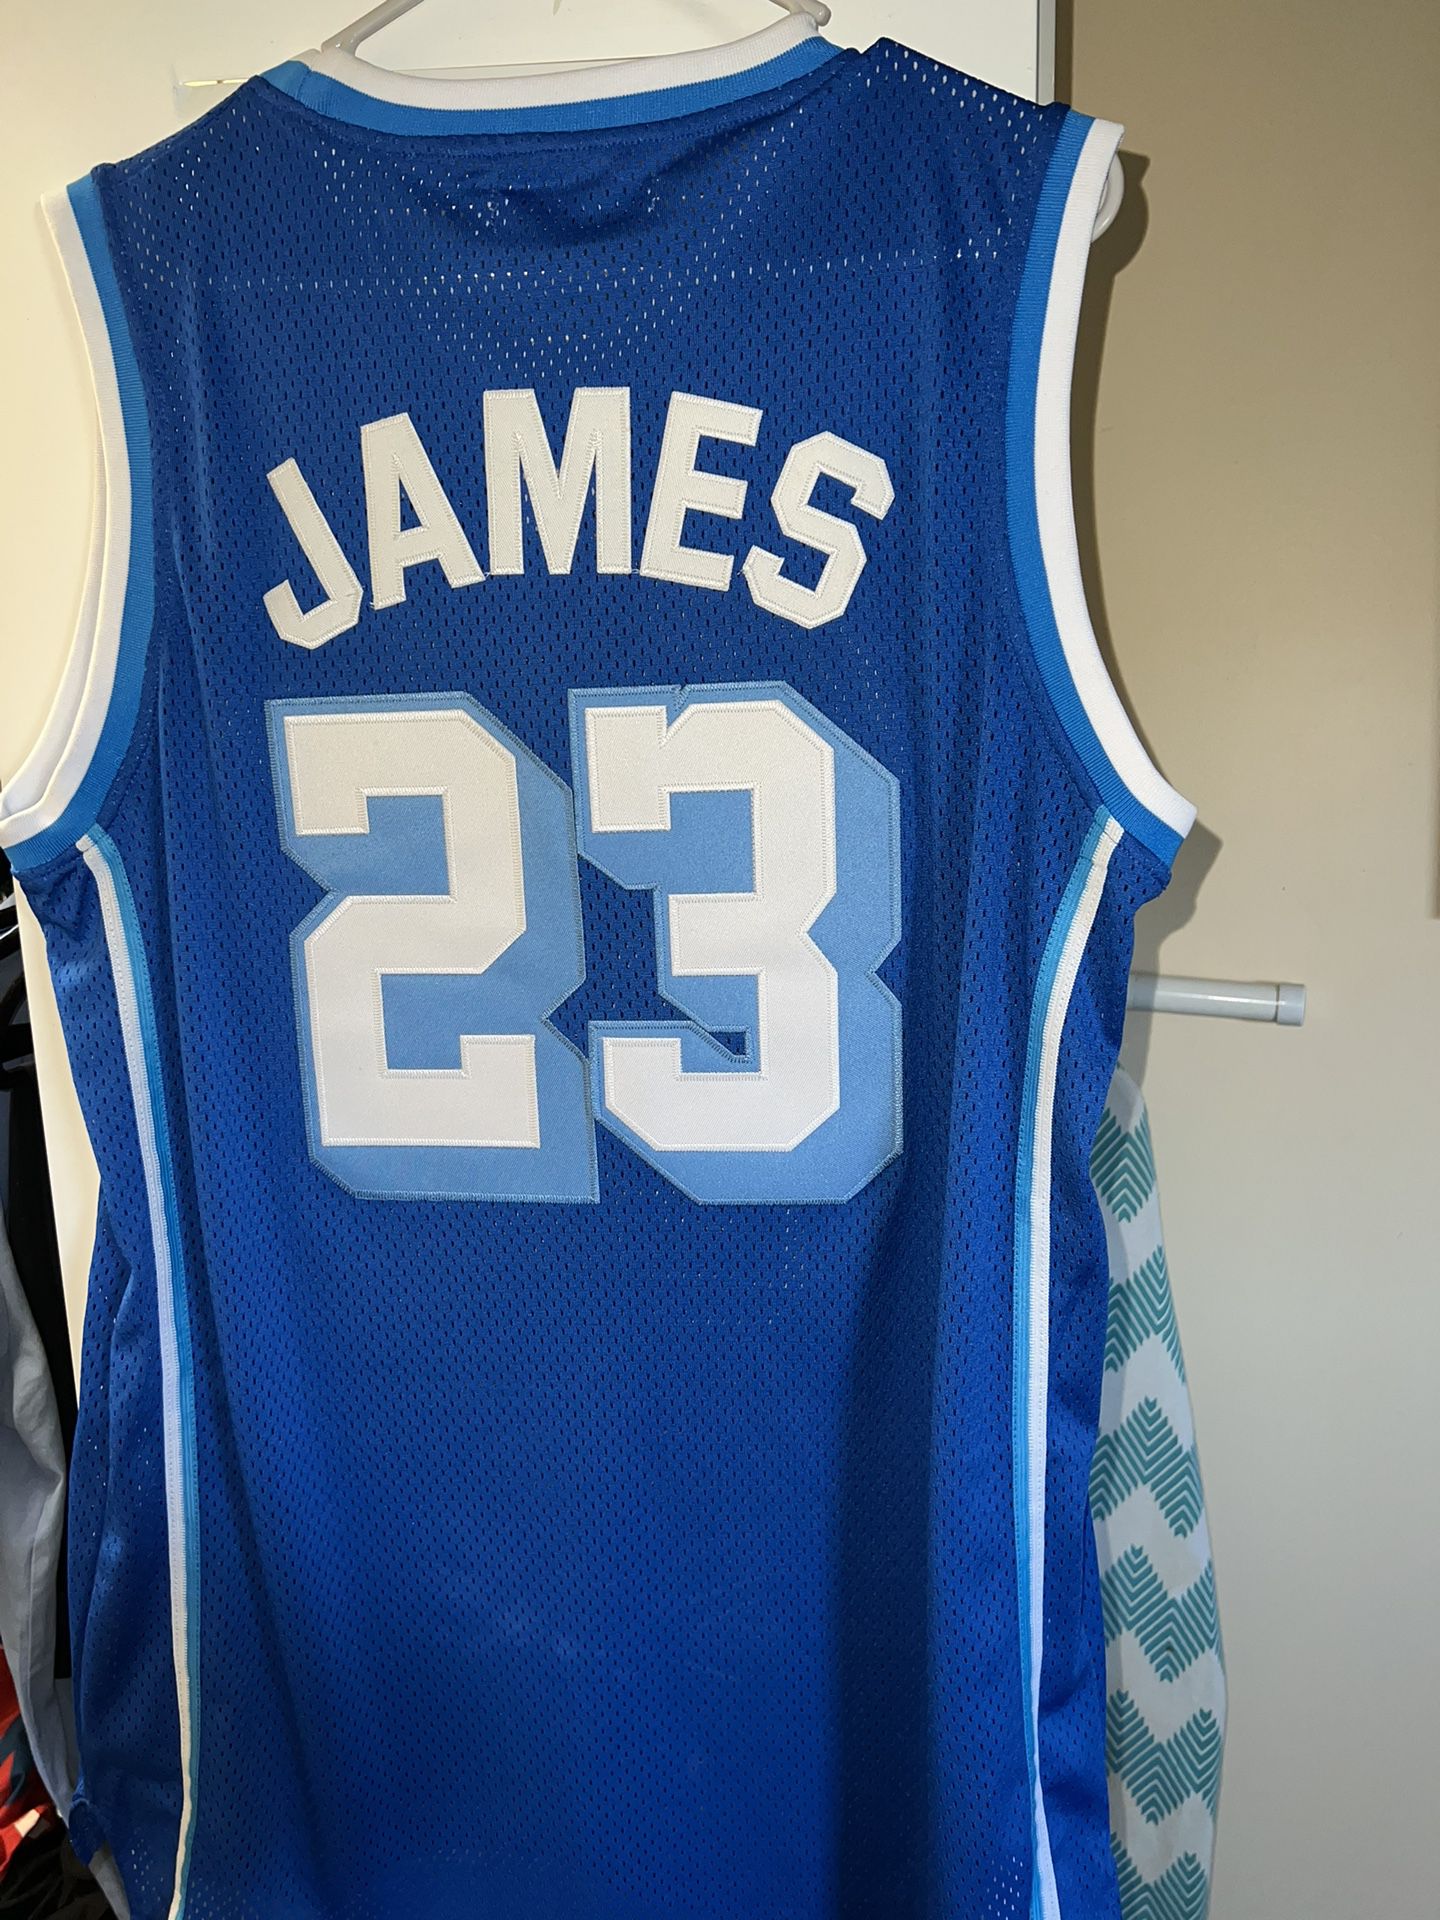 LEBRON JAMES CRENSHAW JERSEY for Sale in Fort Lauderdale, FL - OfferUp